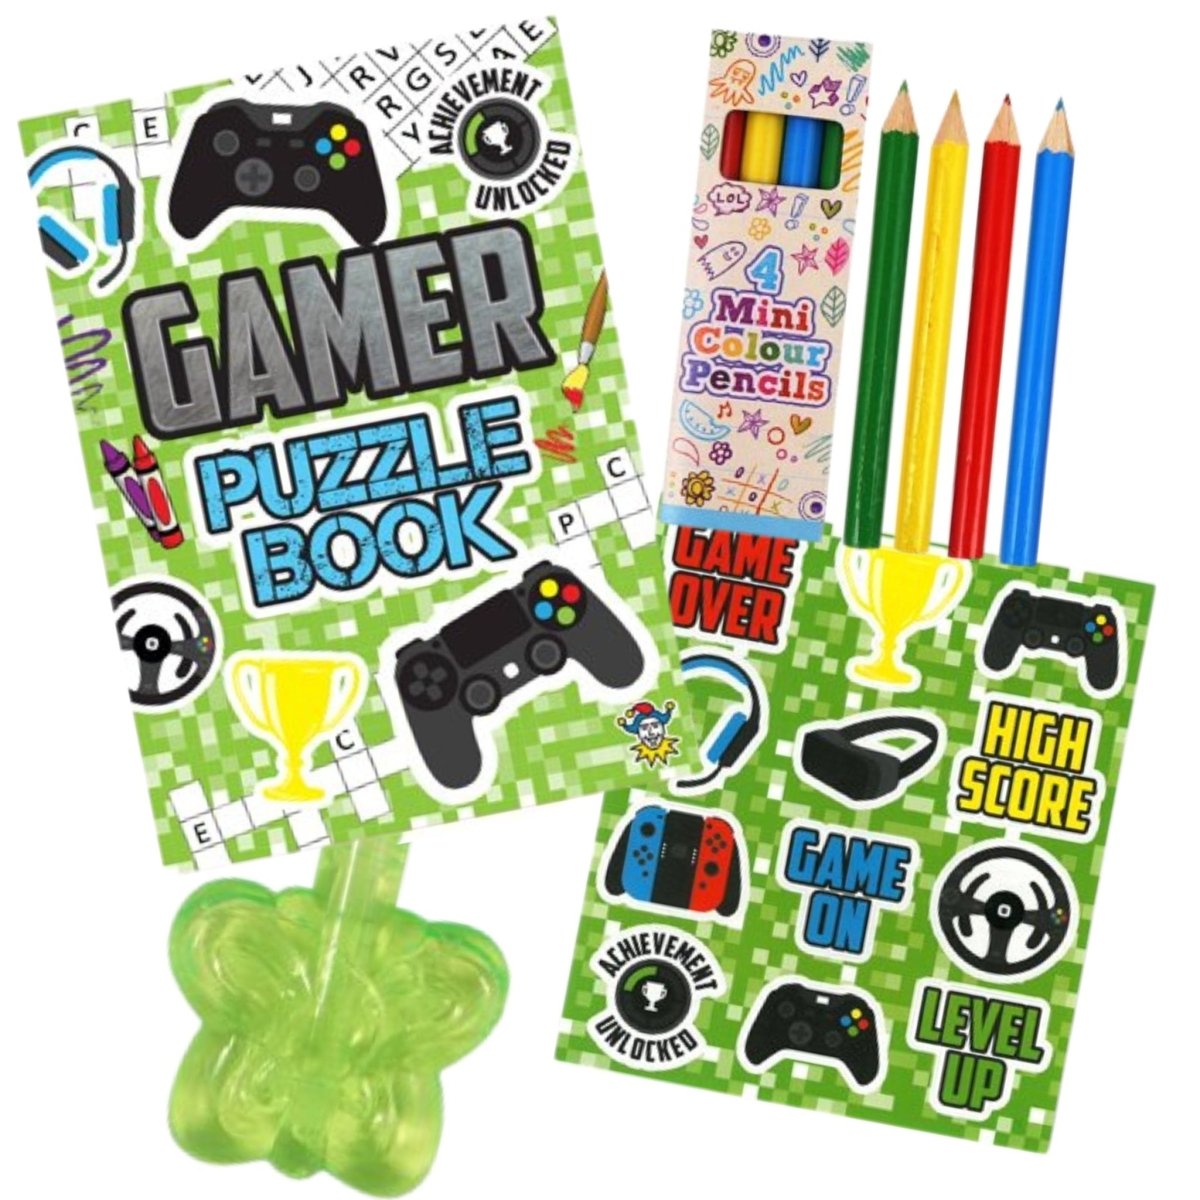 Gamer Themed Activity Pack - Kids Party Craft